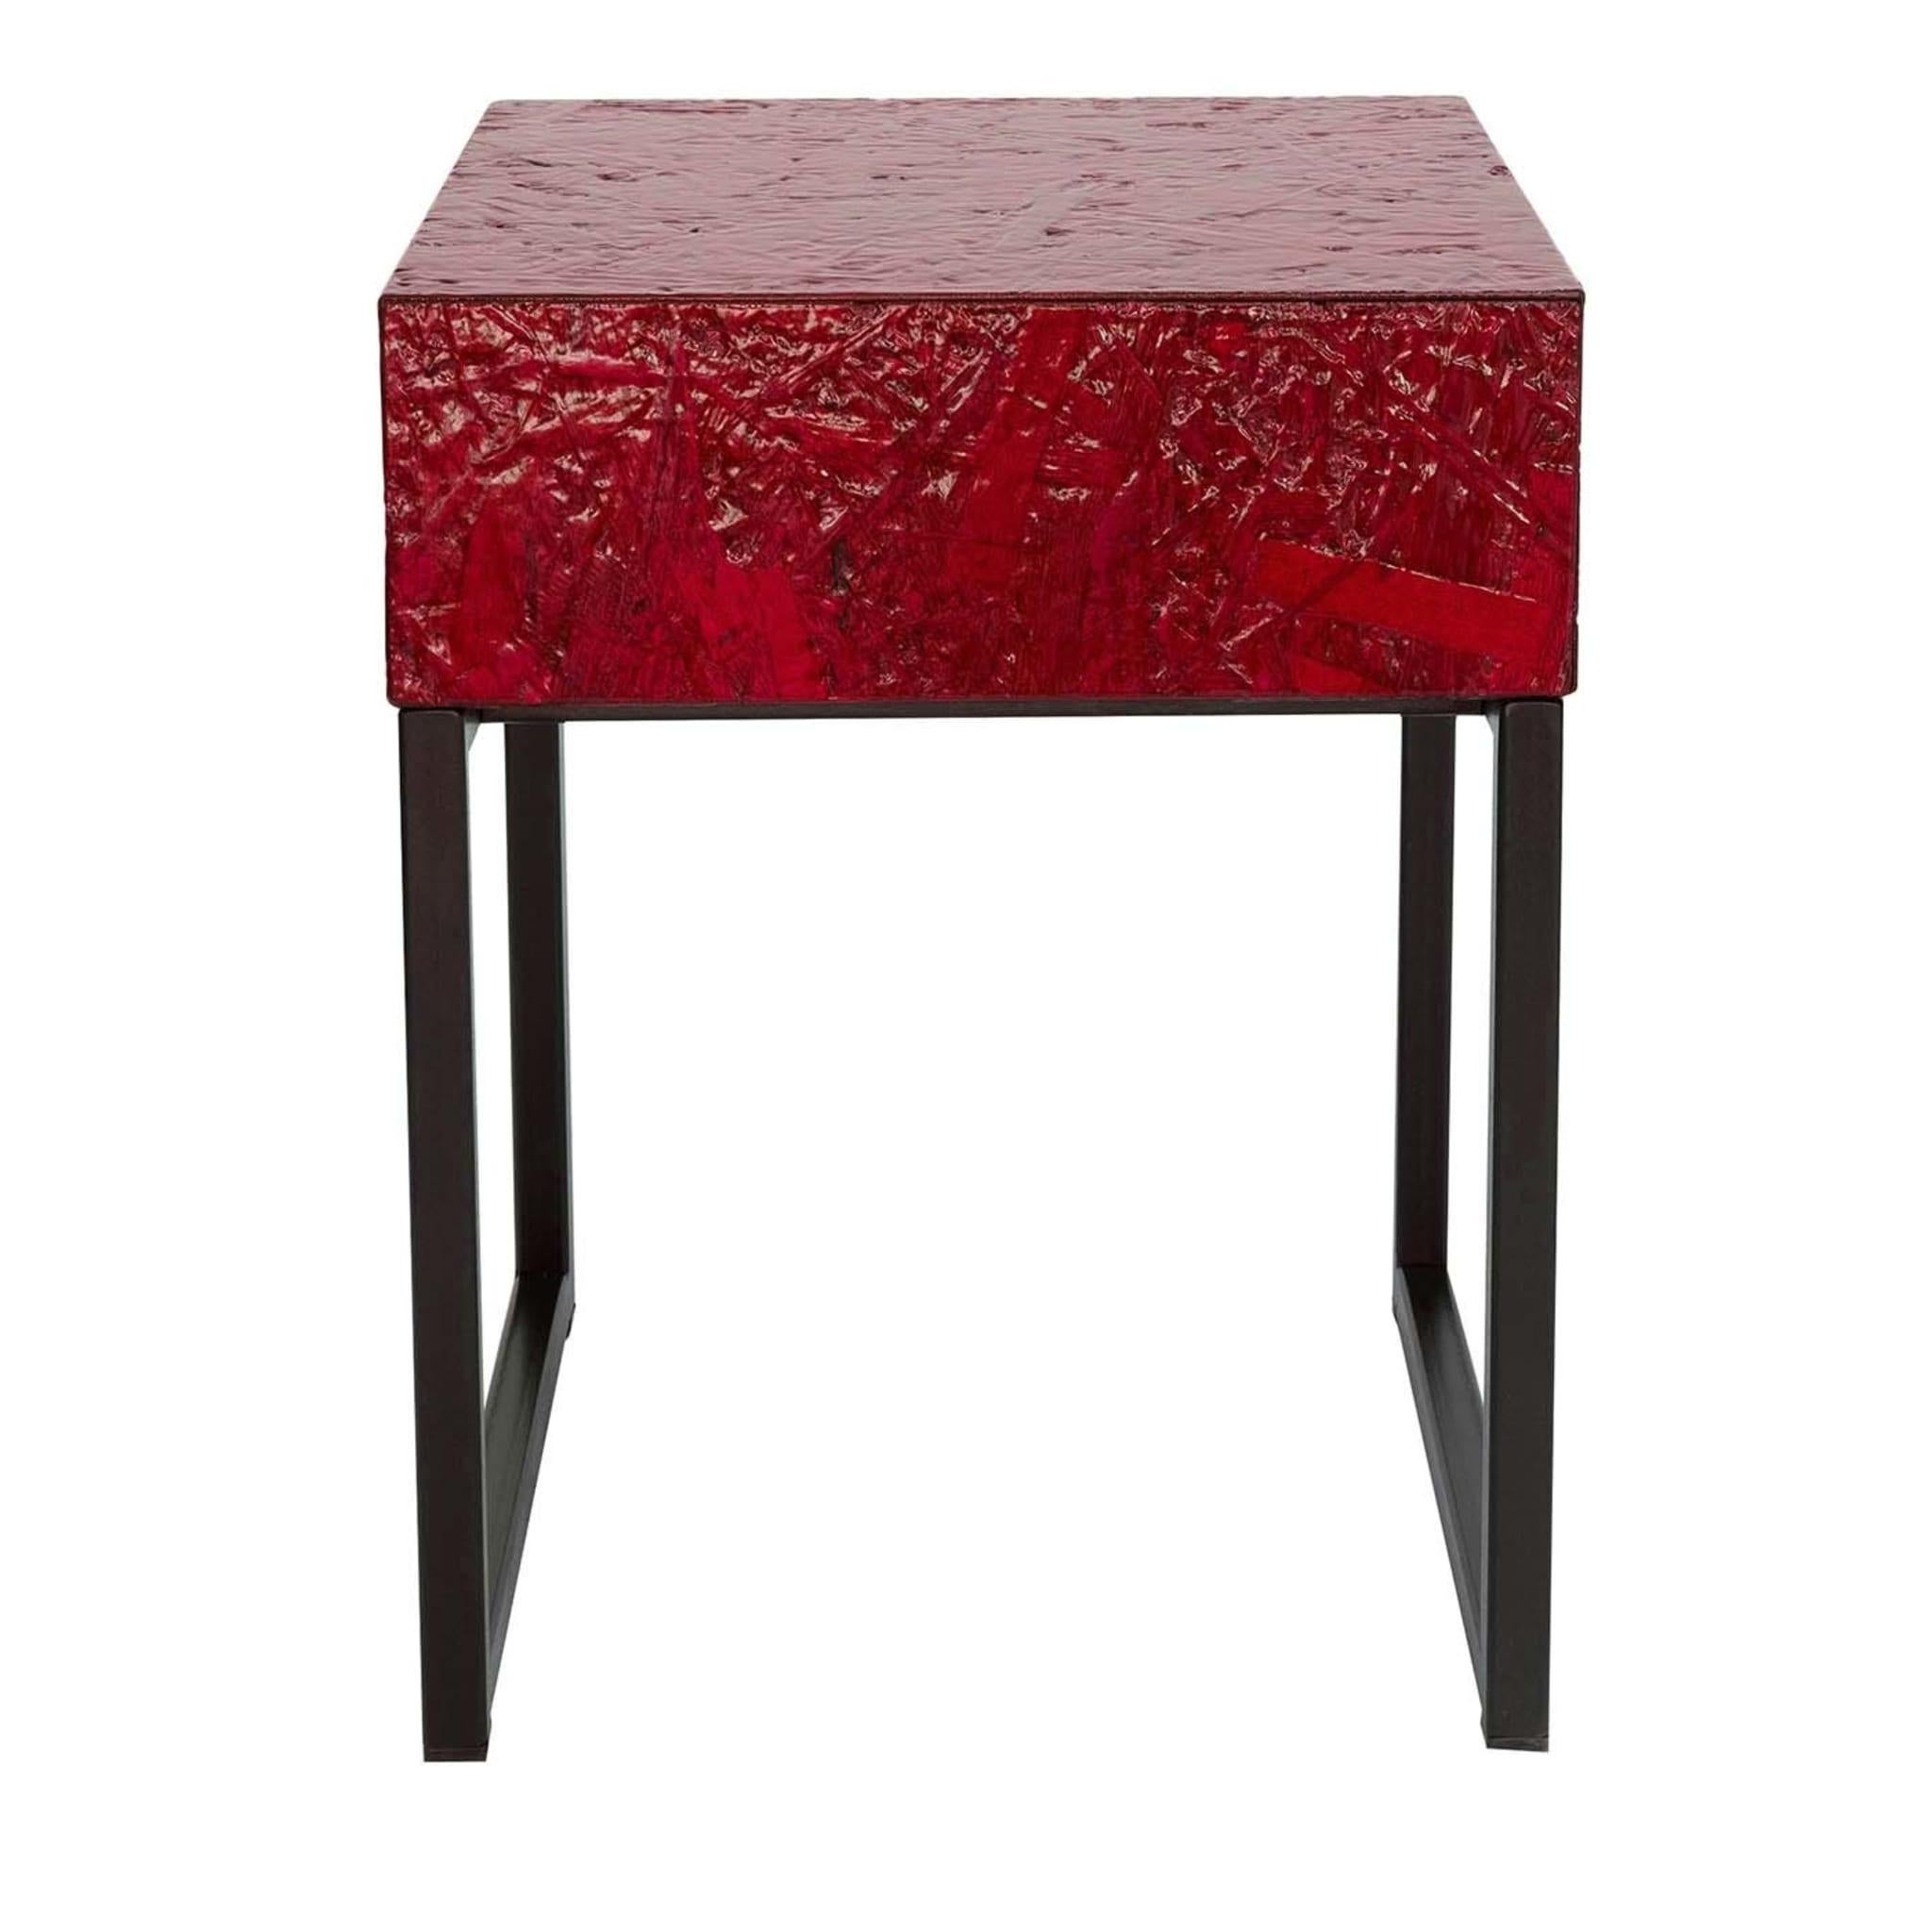 A convenient and elegant spot for your reading lamp or even doubling as a stool, this bedside table in red designed by Fabrizio Contaldo features a handy drawer and measures 35 cm square and 45 cm in height. Made from glossy OBS with a matt black